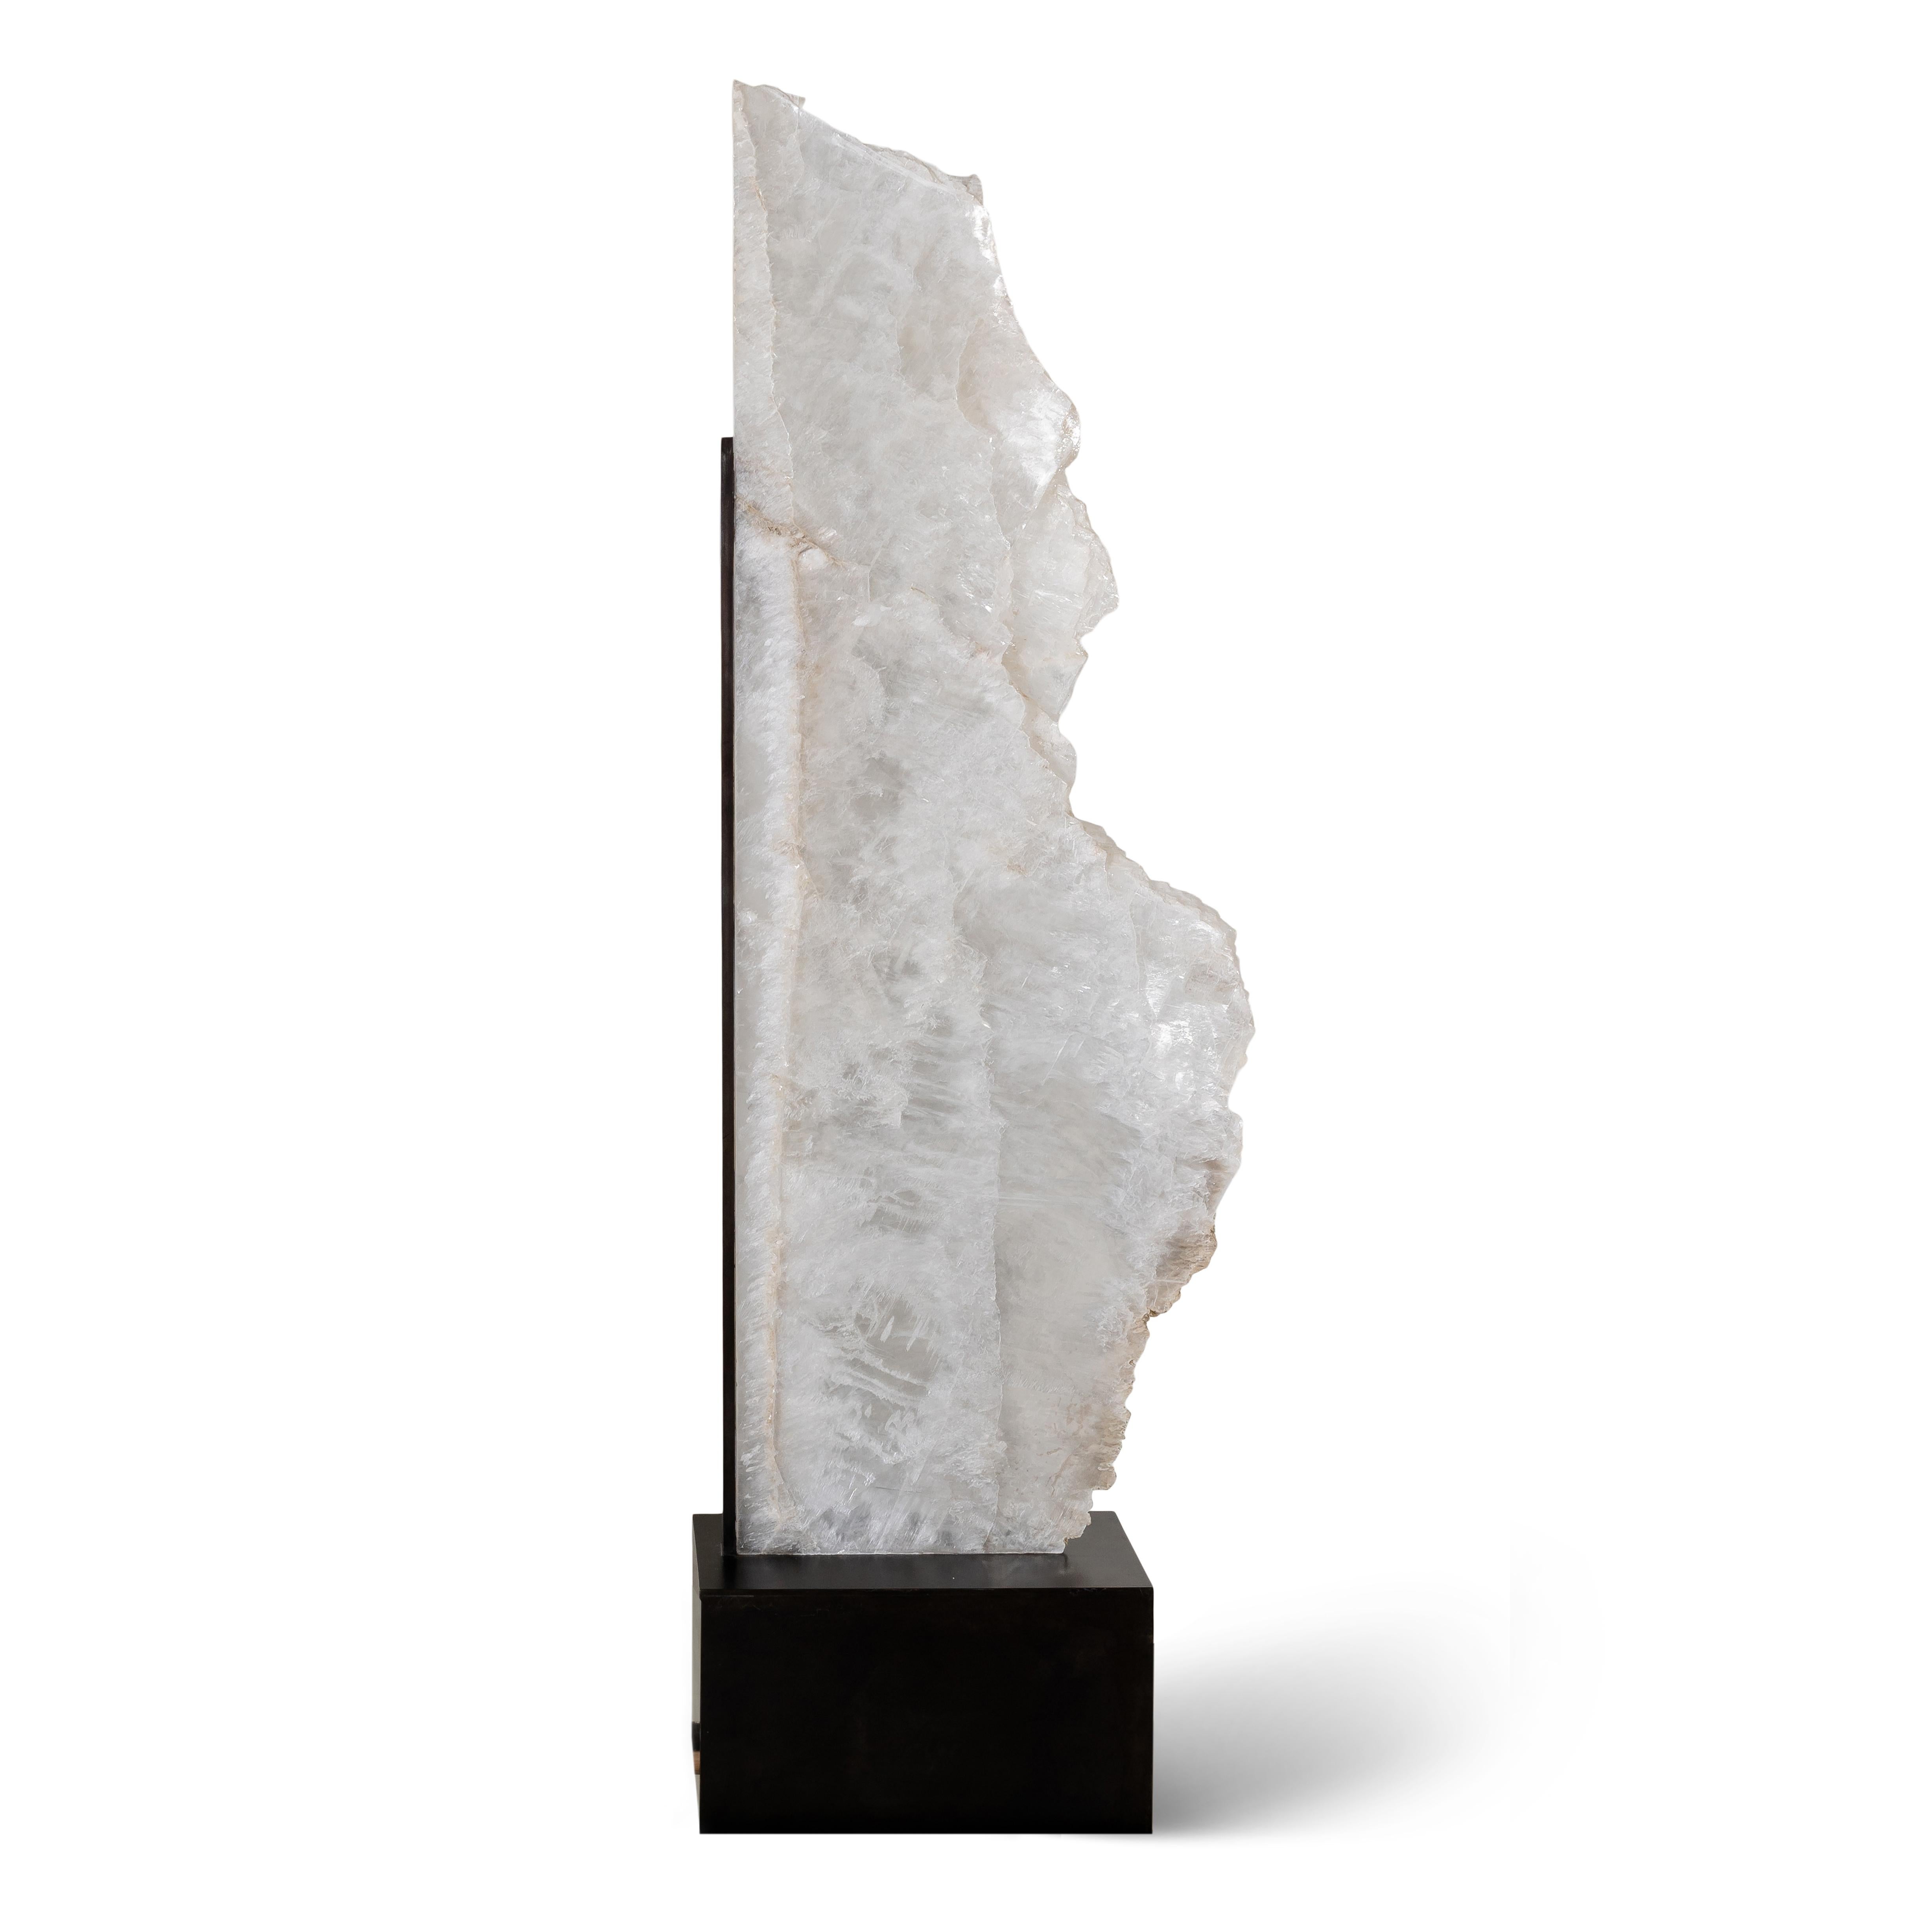 Towers sold separately

Large selenite live edge sculpture.

Selenite crystal from New Mexico then crafted in to a museum style tower sculpture piece.





